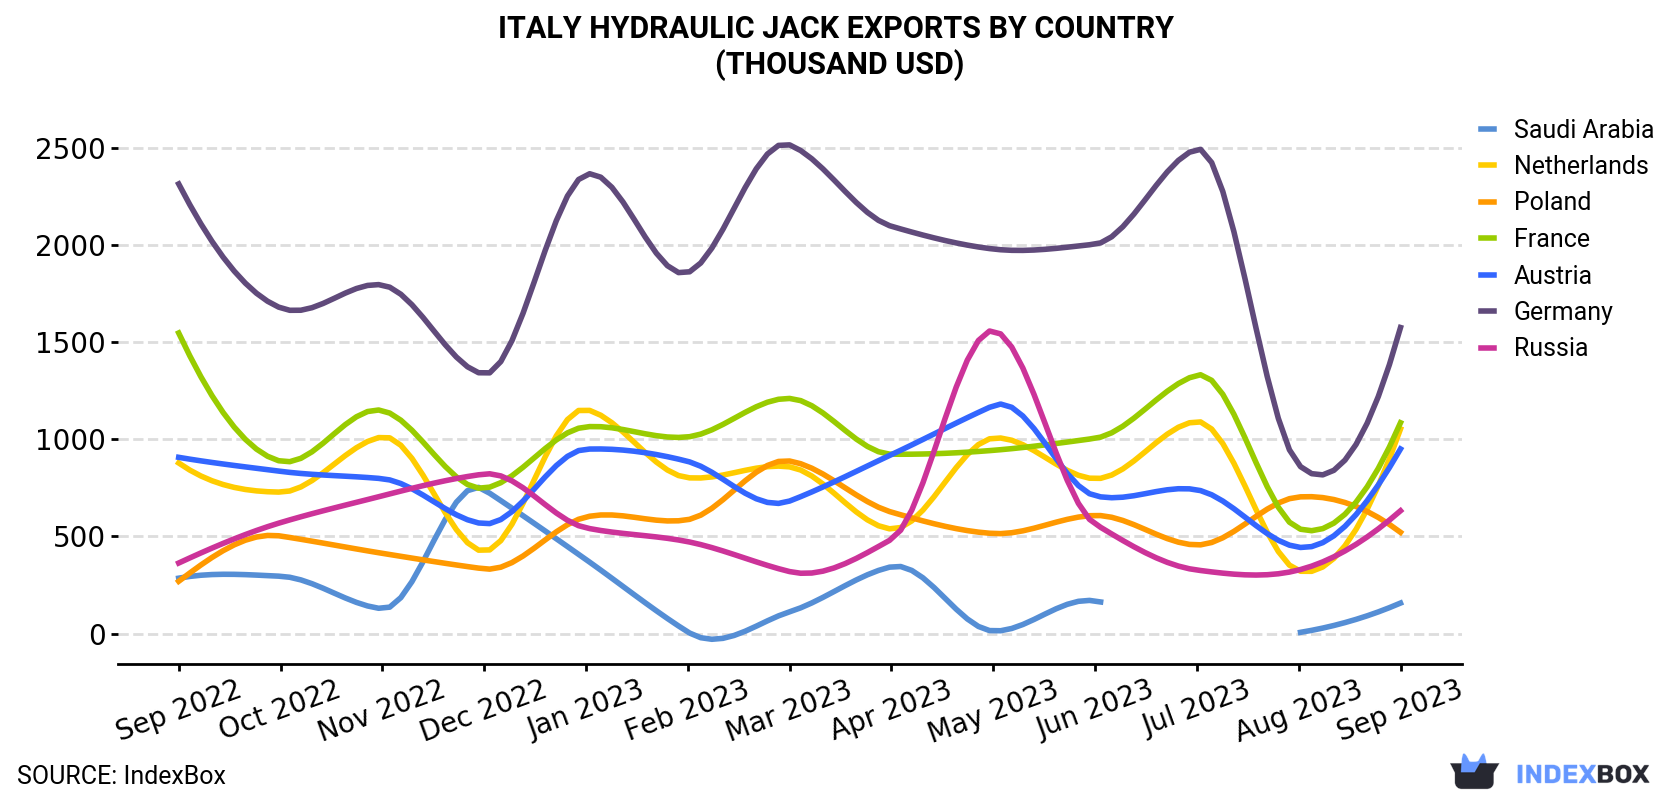 Italy Hydraulic Jack Exports By Country (Thousand USD)